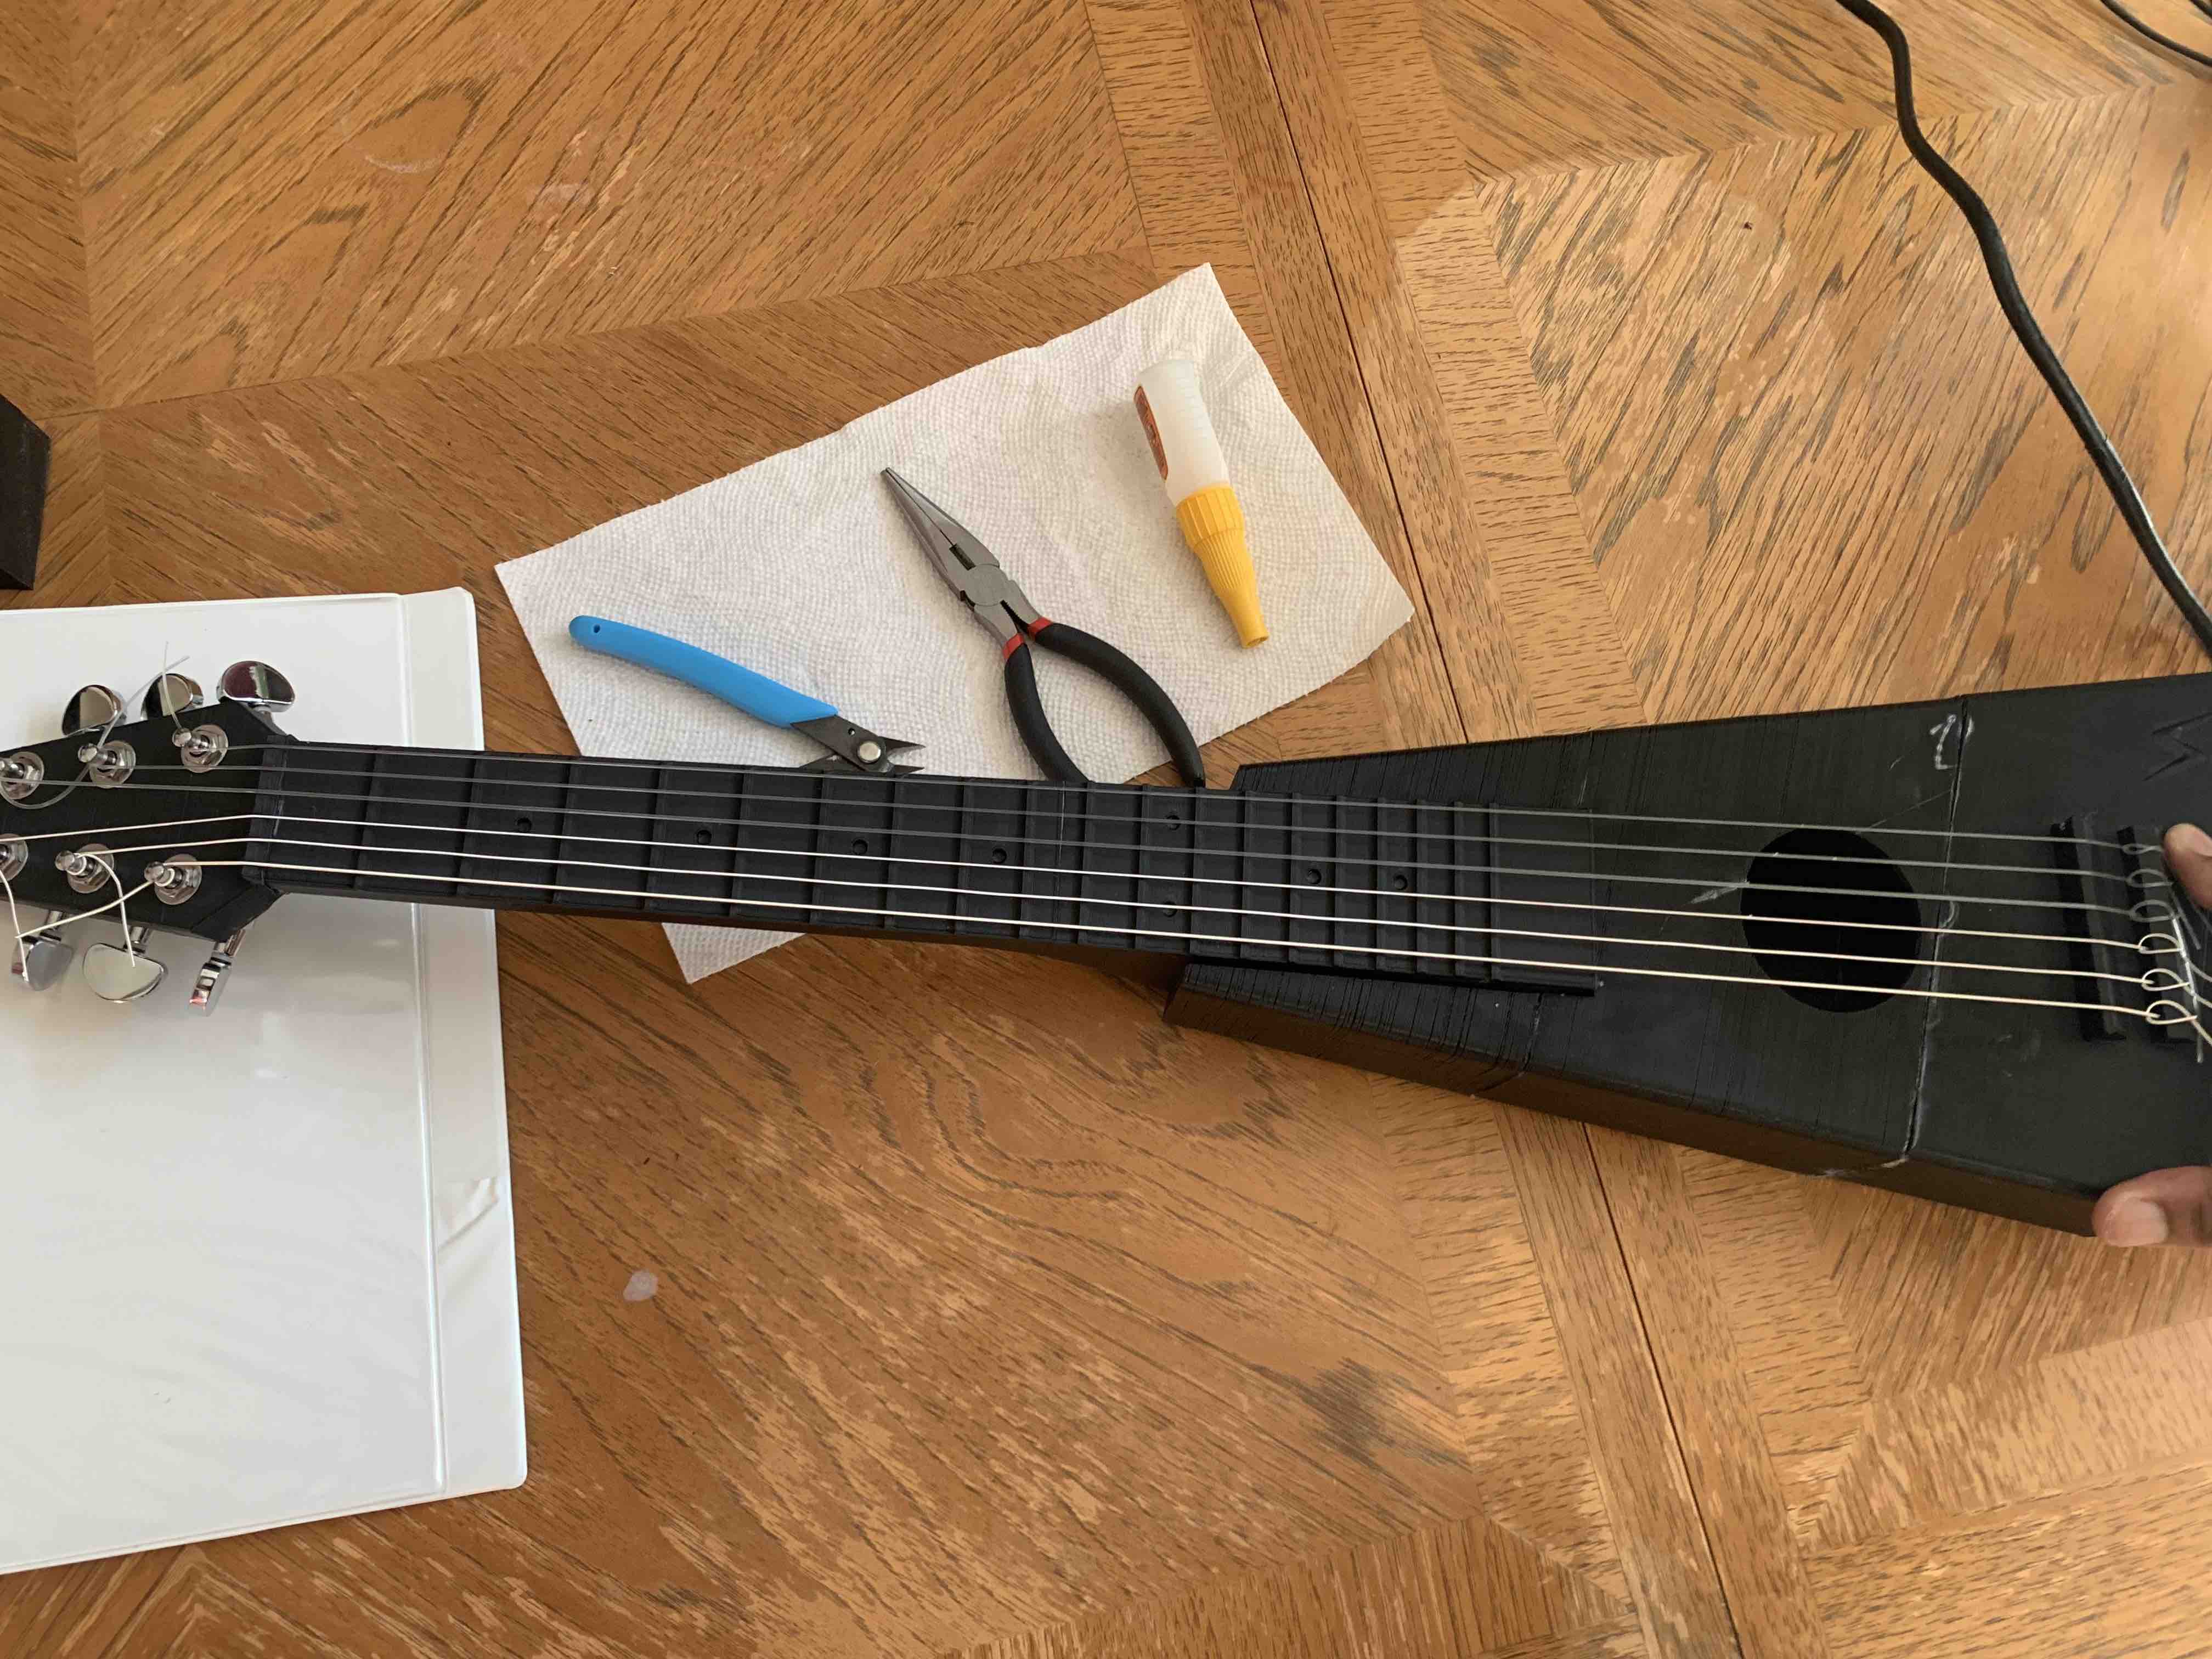 A photo of the originally printed guitar, with some of the flaws visible.